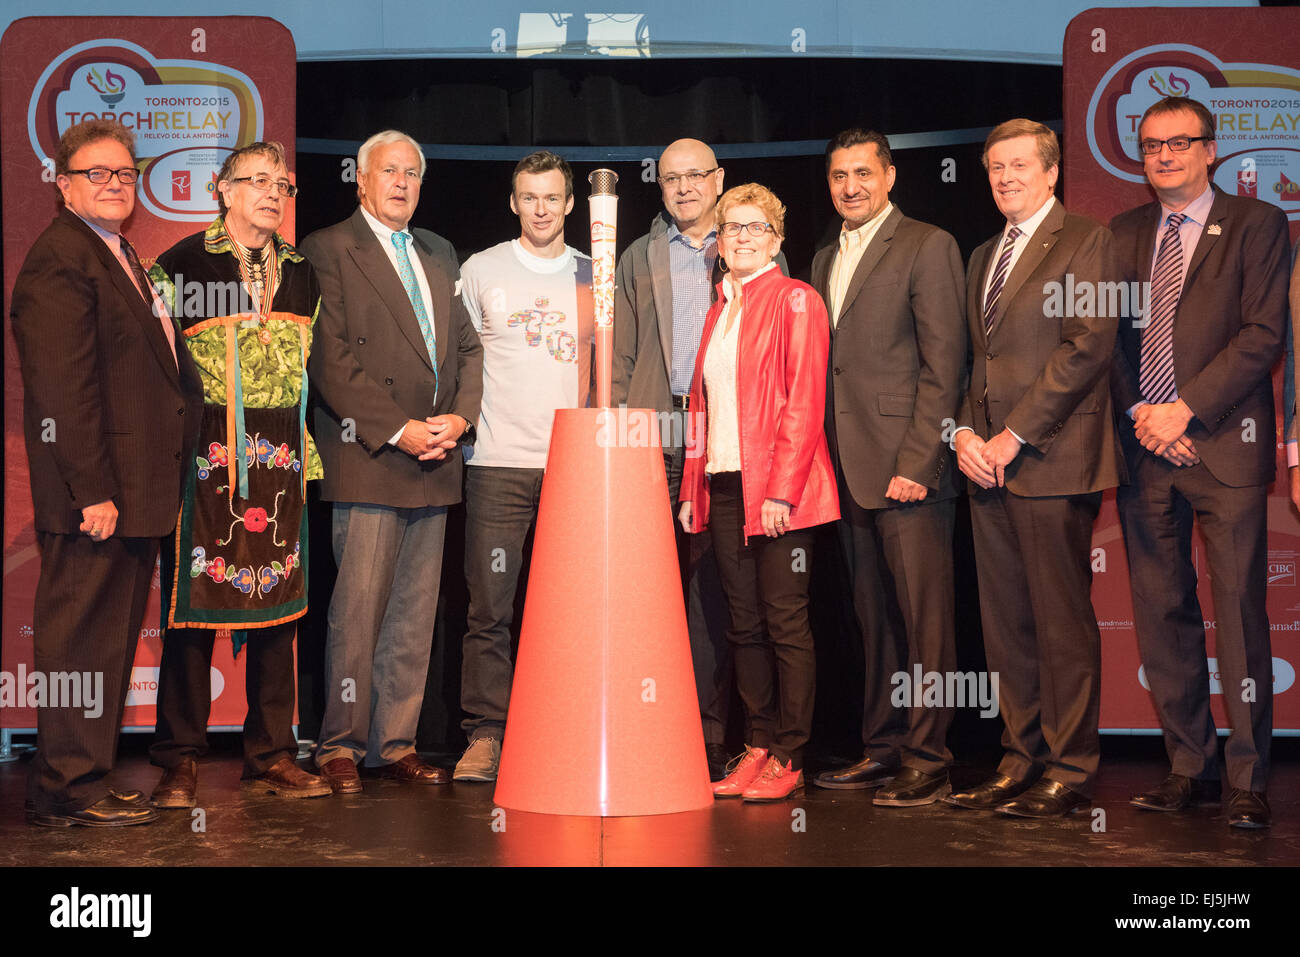 Toronto, CAN., 16 Mar 2015 - Ontario Premier Kathleen Wynne, Toronto Mayor John Tory, and a collection of dignitaries, gathered at The Ontario Science Centre in Toronto to launch the Torch Relay for the 2015 Pan Am/Para Pan Games. Stock Photo